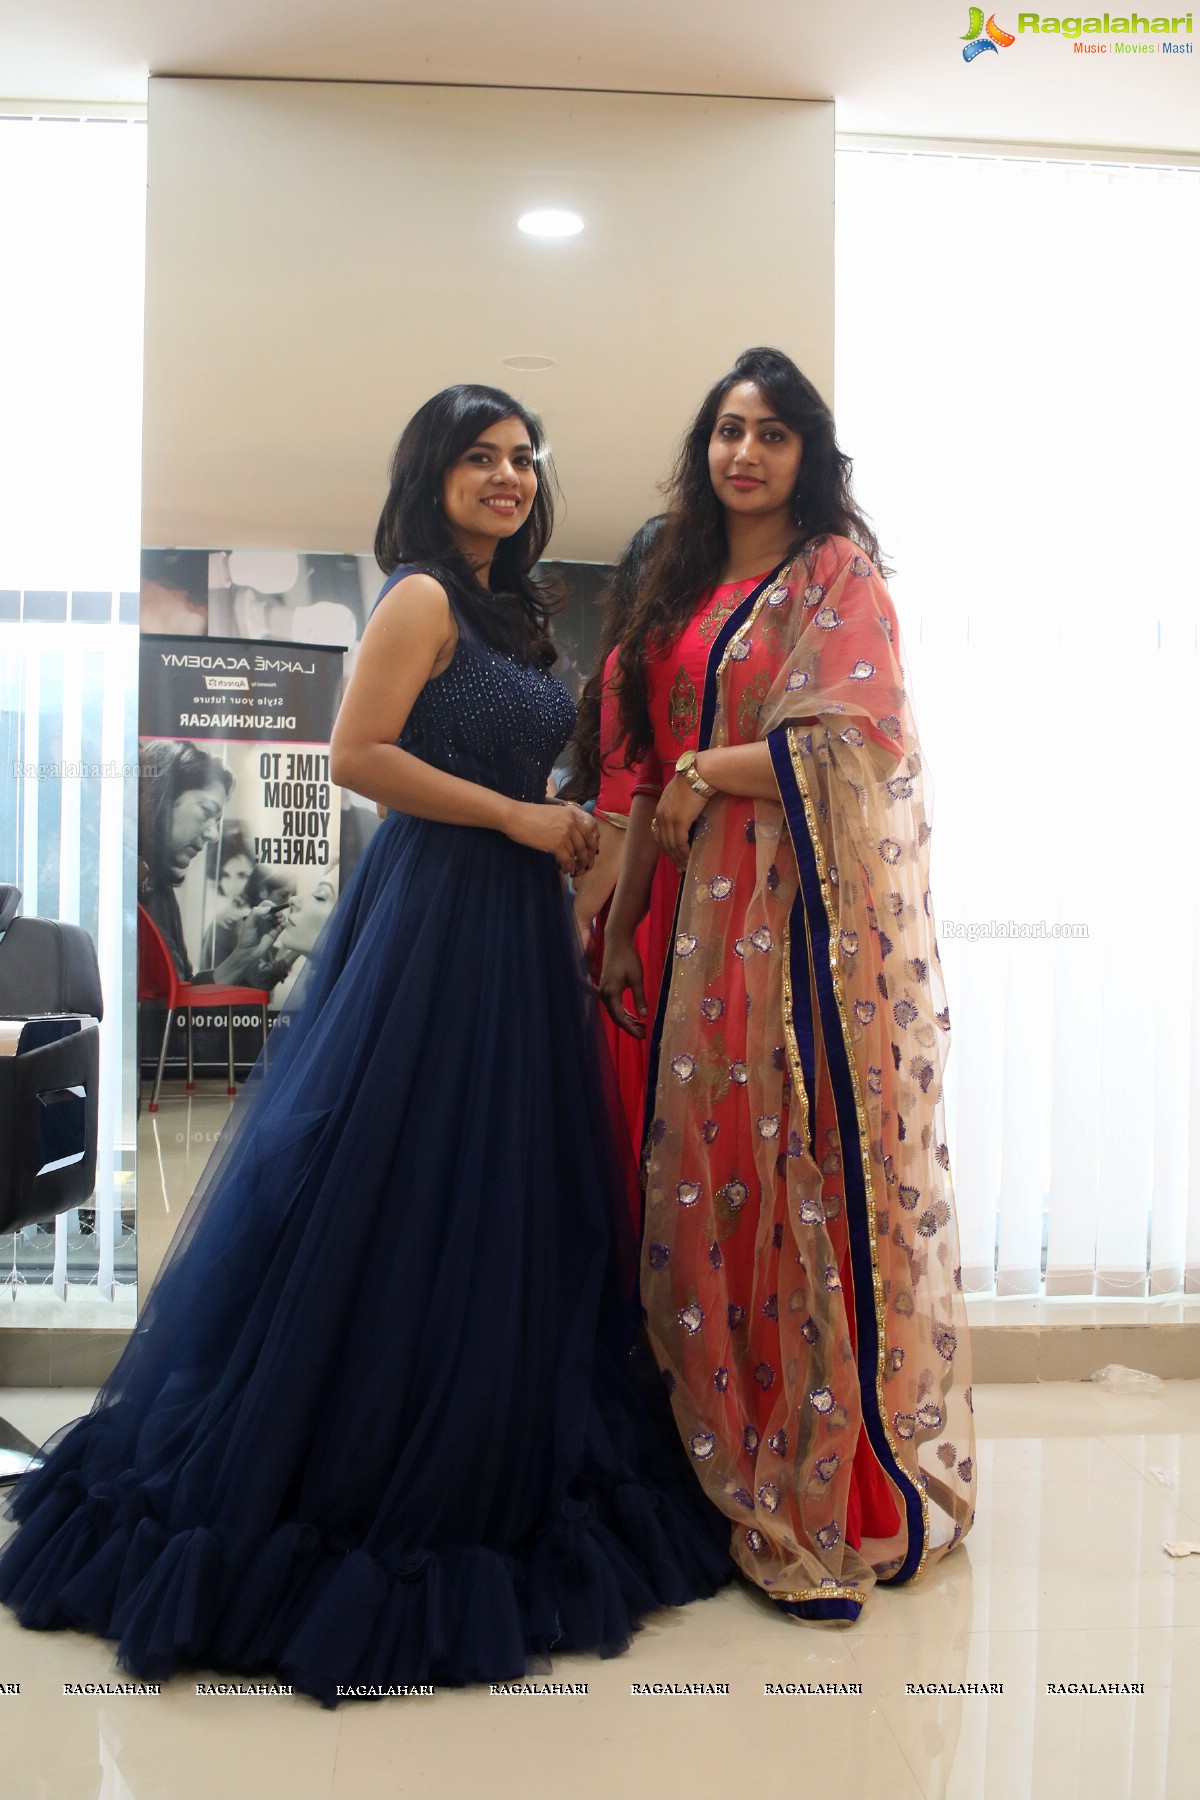 Maya Nelluri Launches Lakme Academy Powered by Aptech New Center